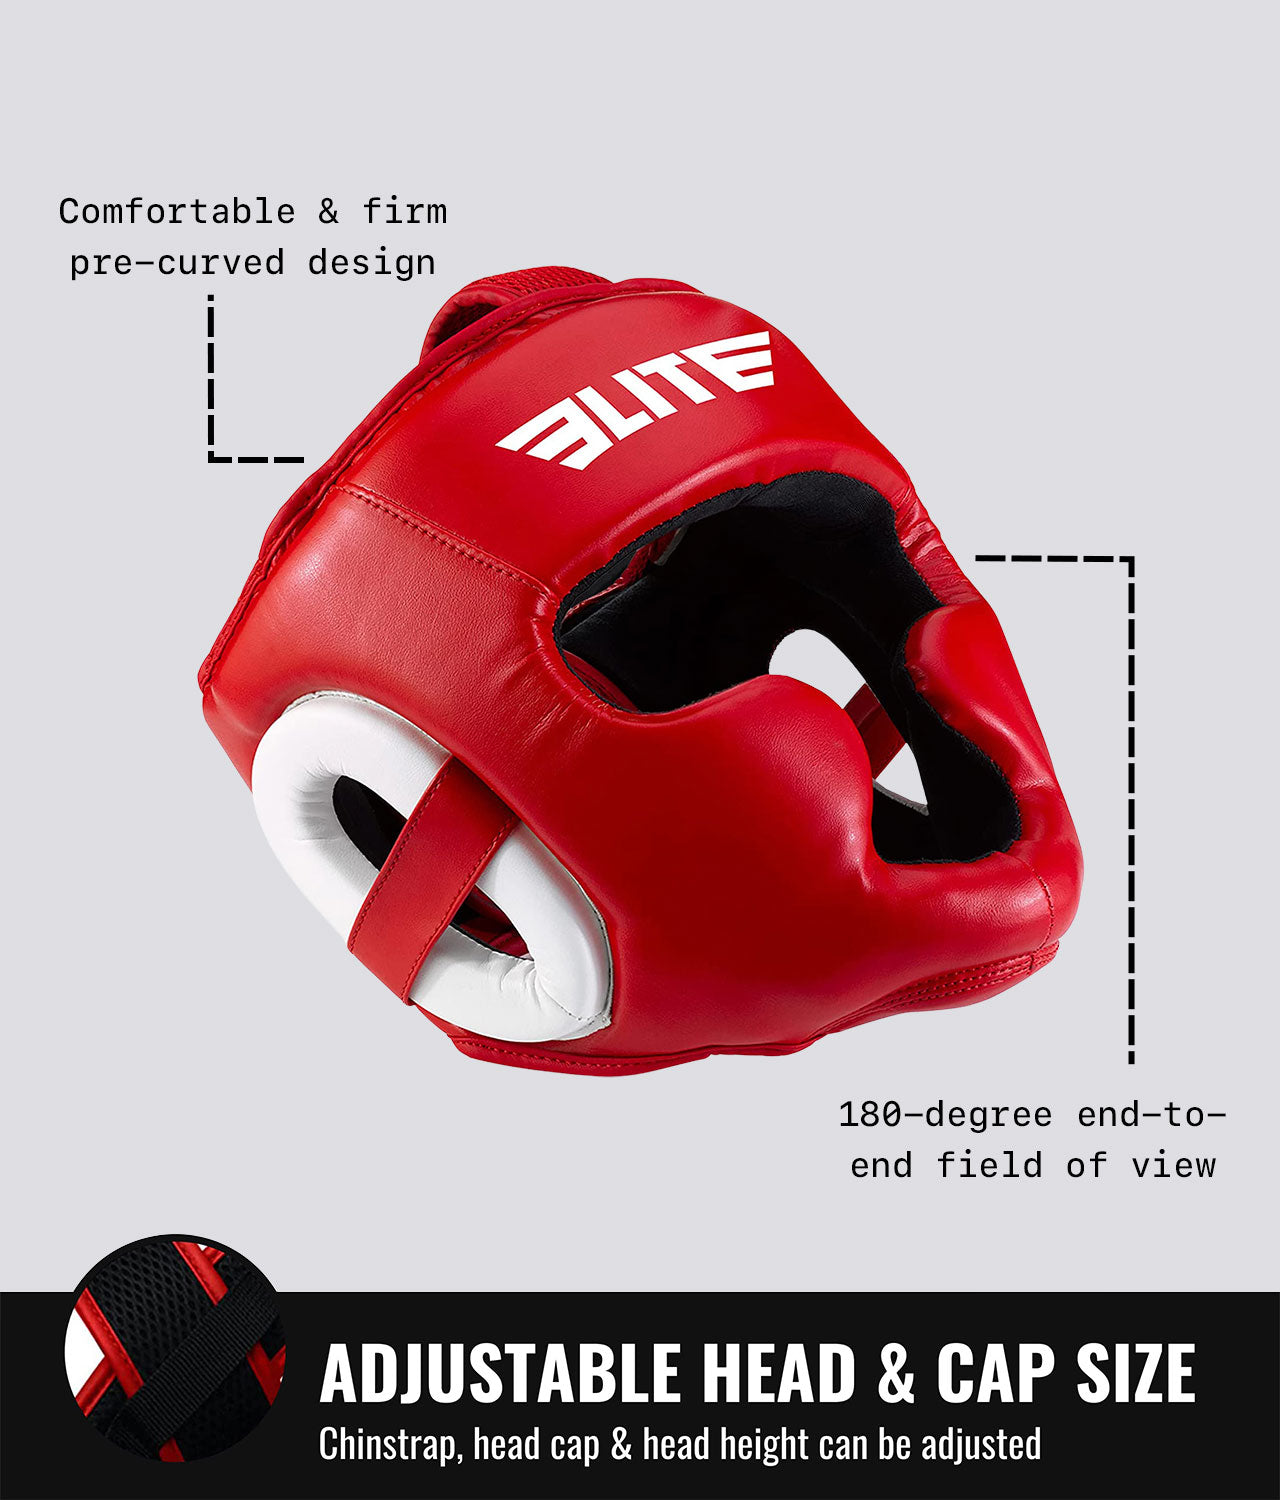 Elite Sports Adults' Essential Red Boxing Headgear